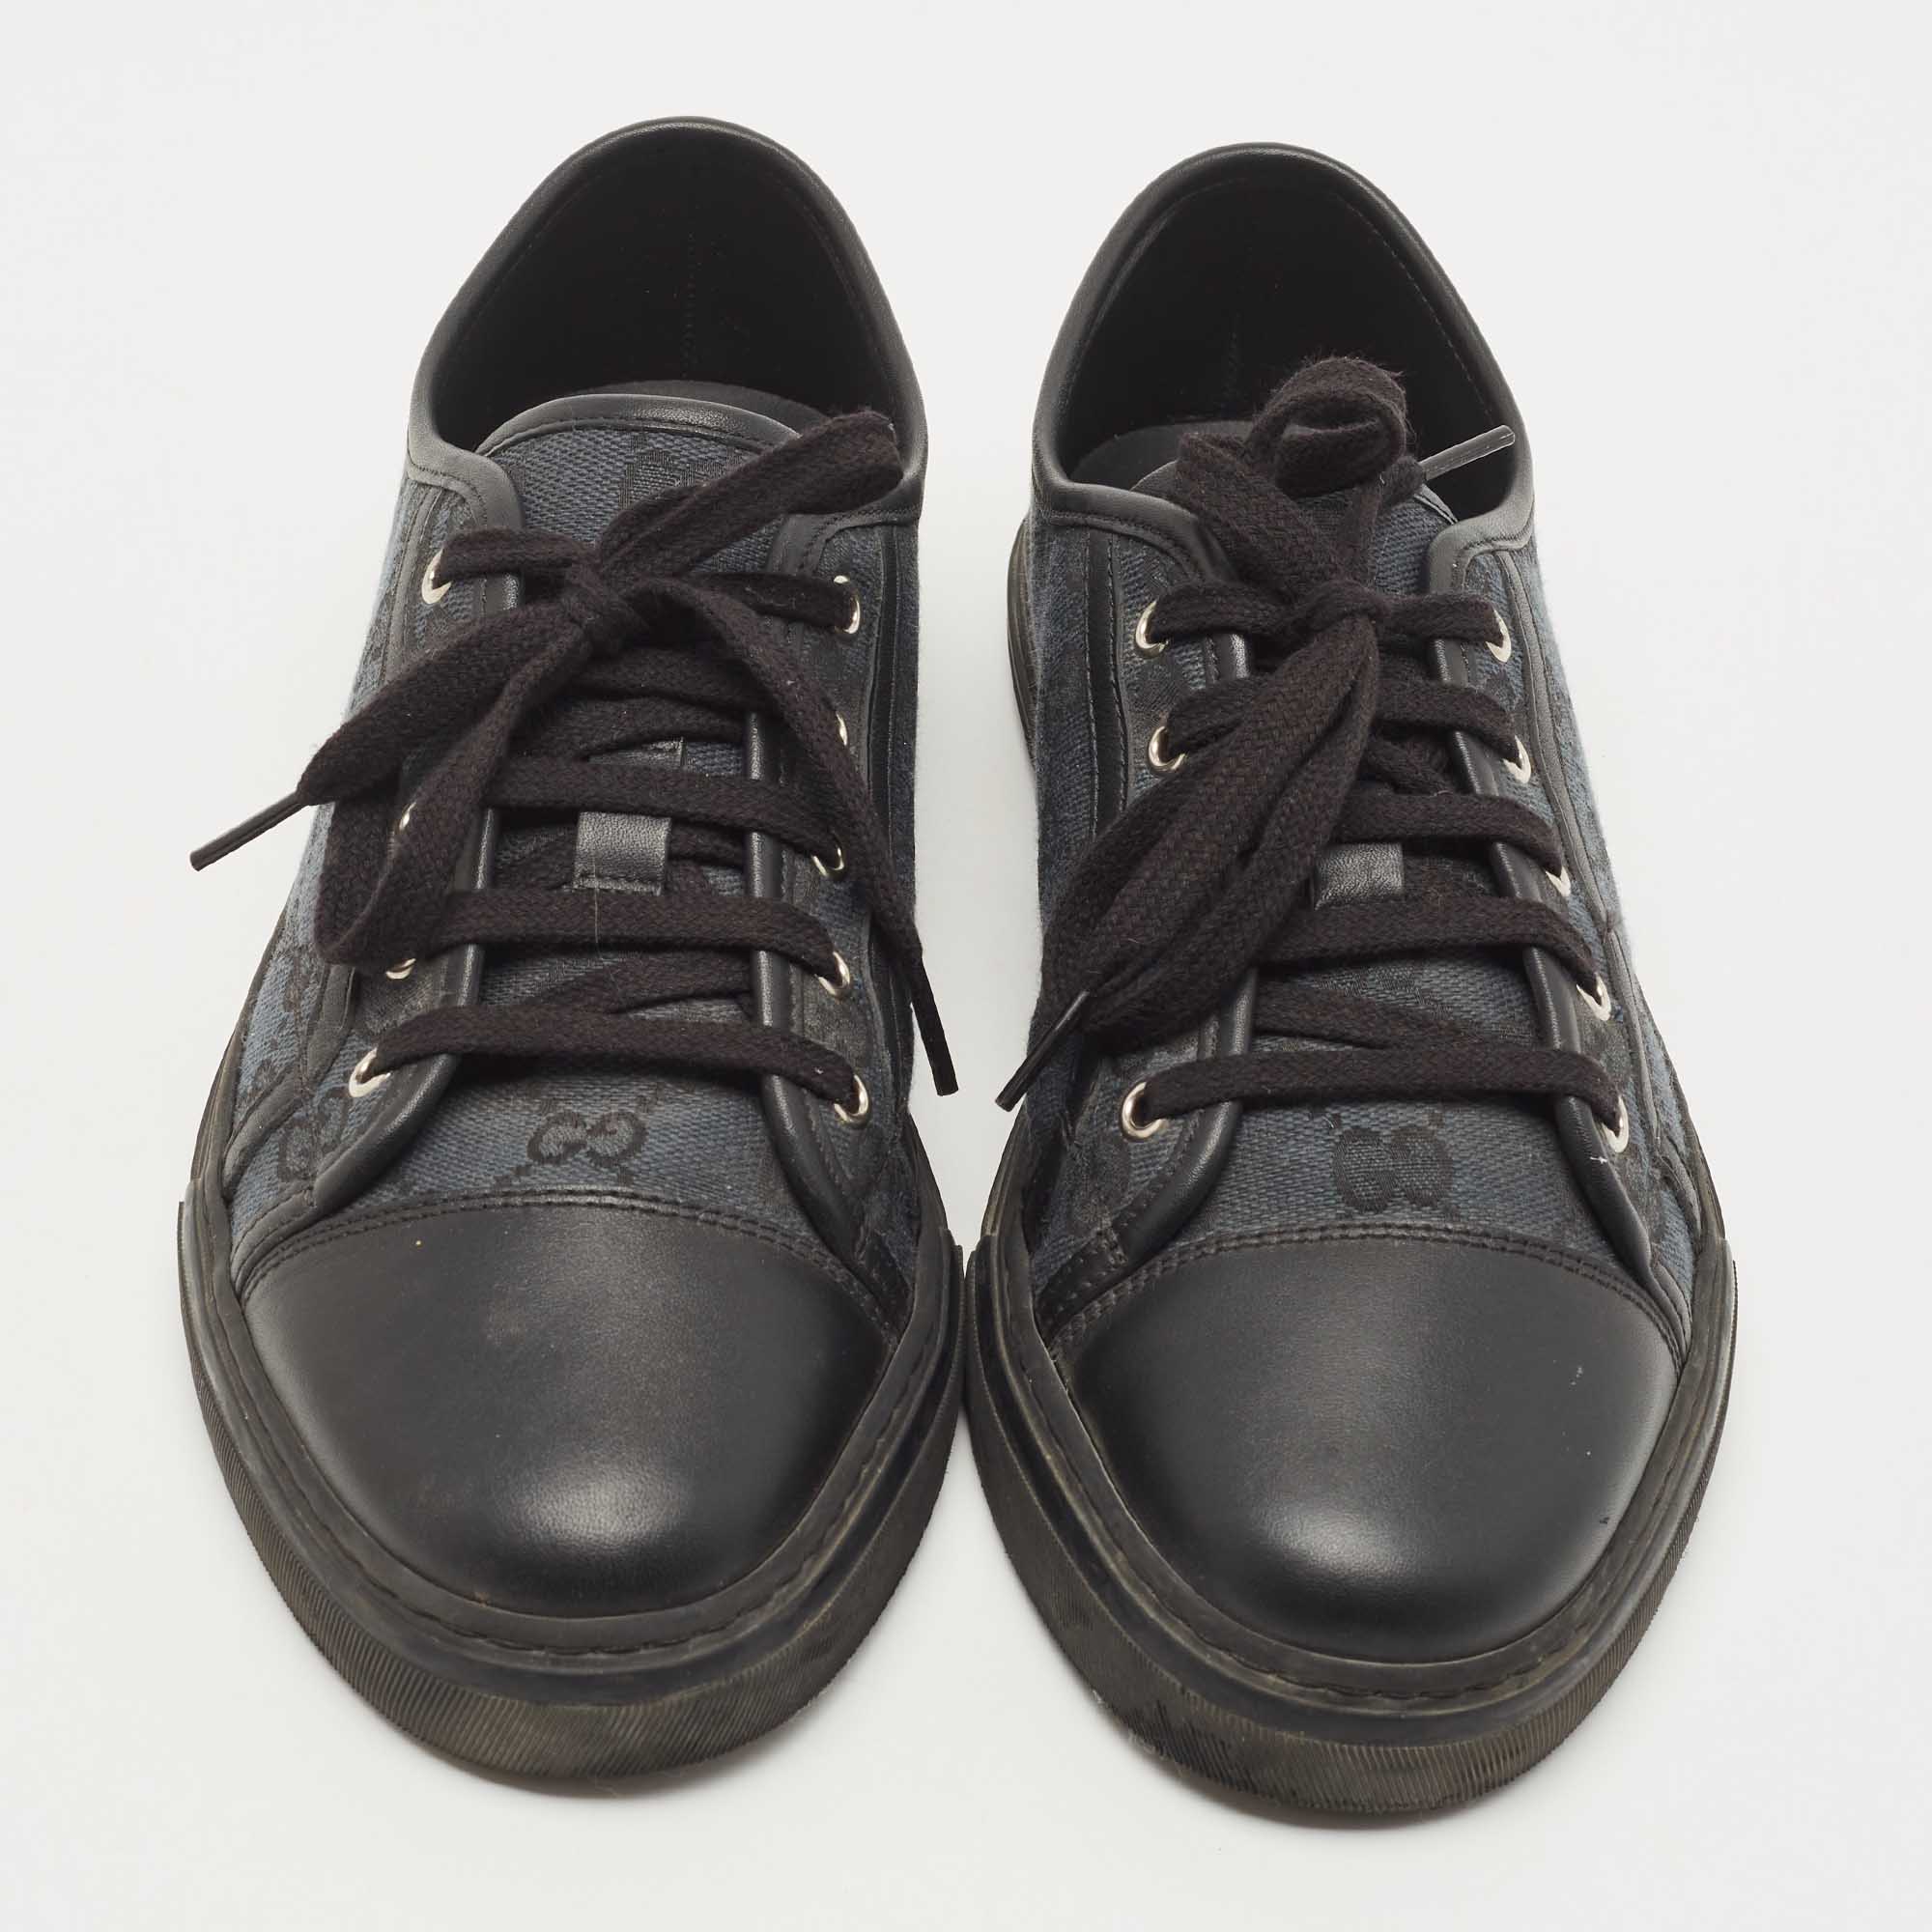 Gucci Black GG Canvas And Leather Low Top Sneakers Size 40.5